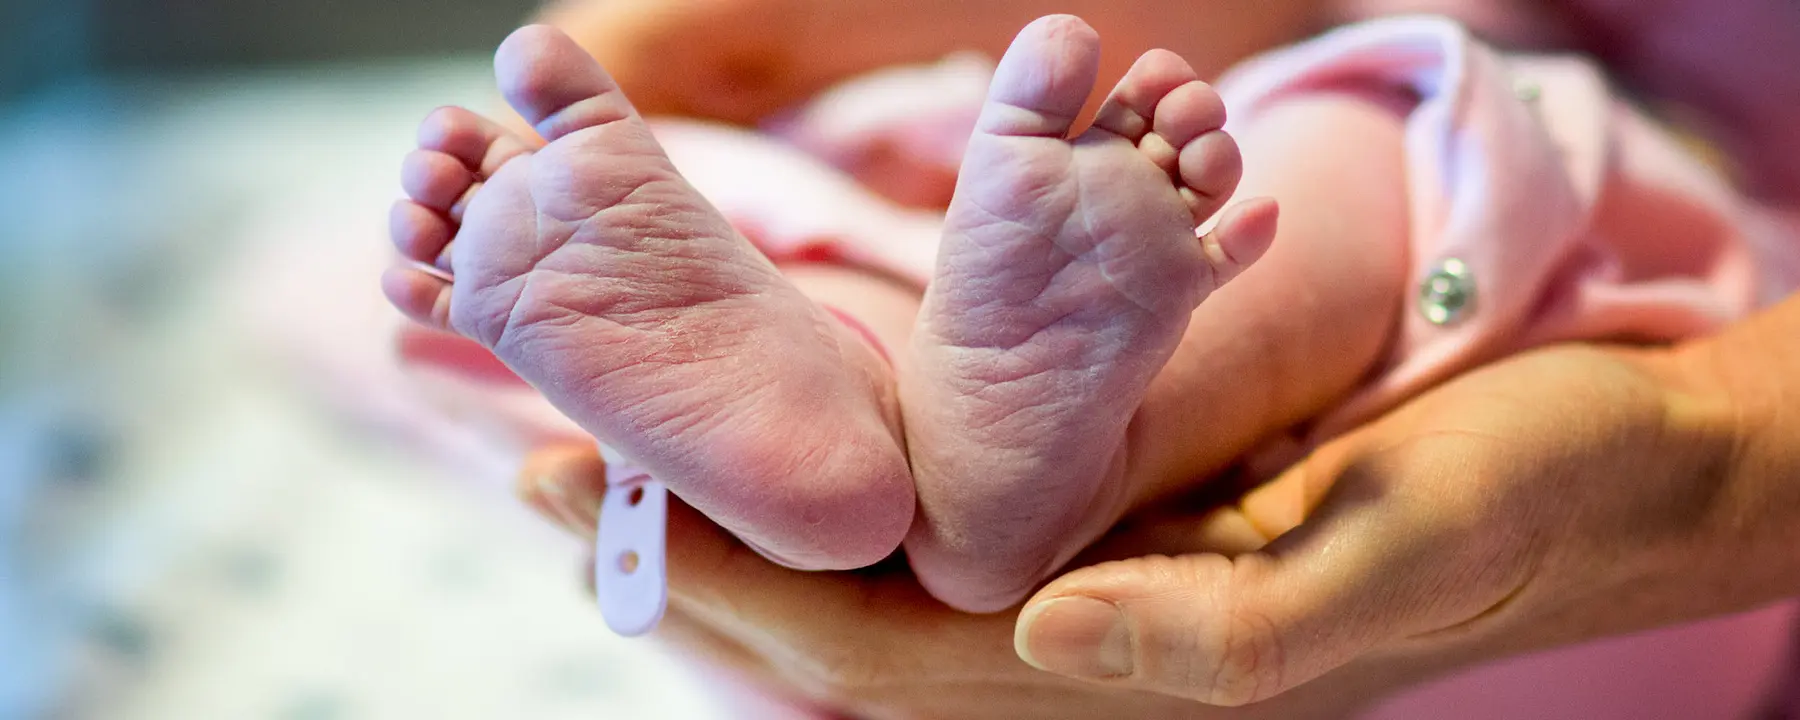 Nurse holds the feet of a premature infant